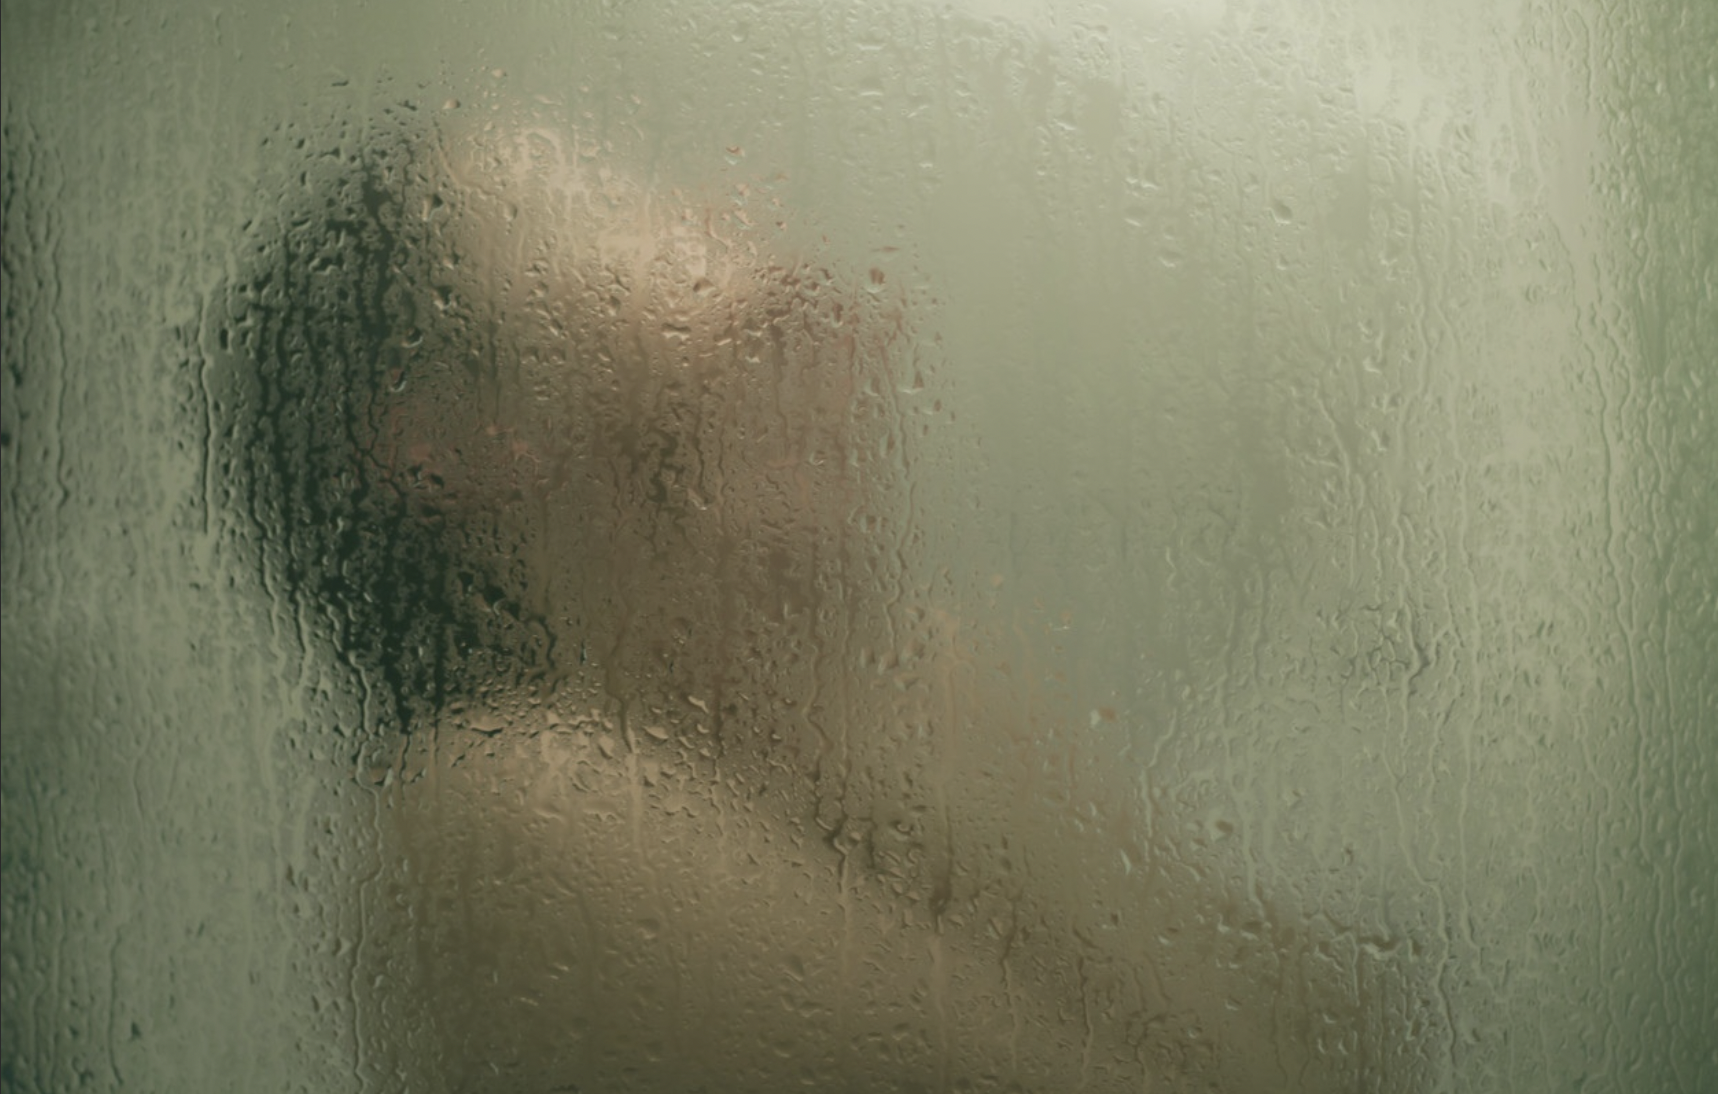 Woman in shower | Source: Flickr